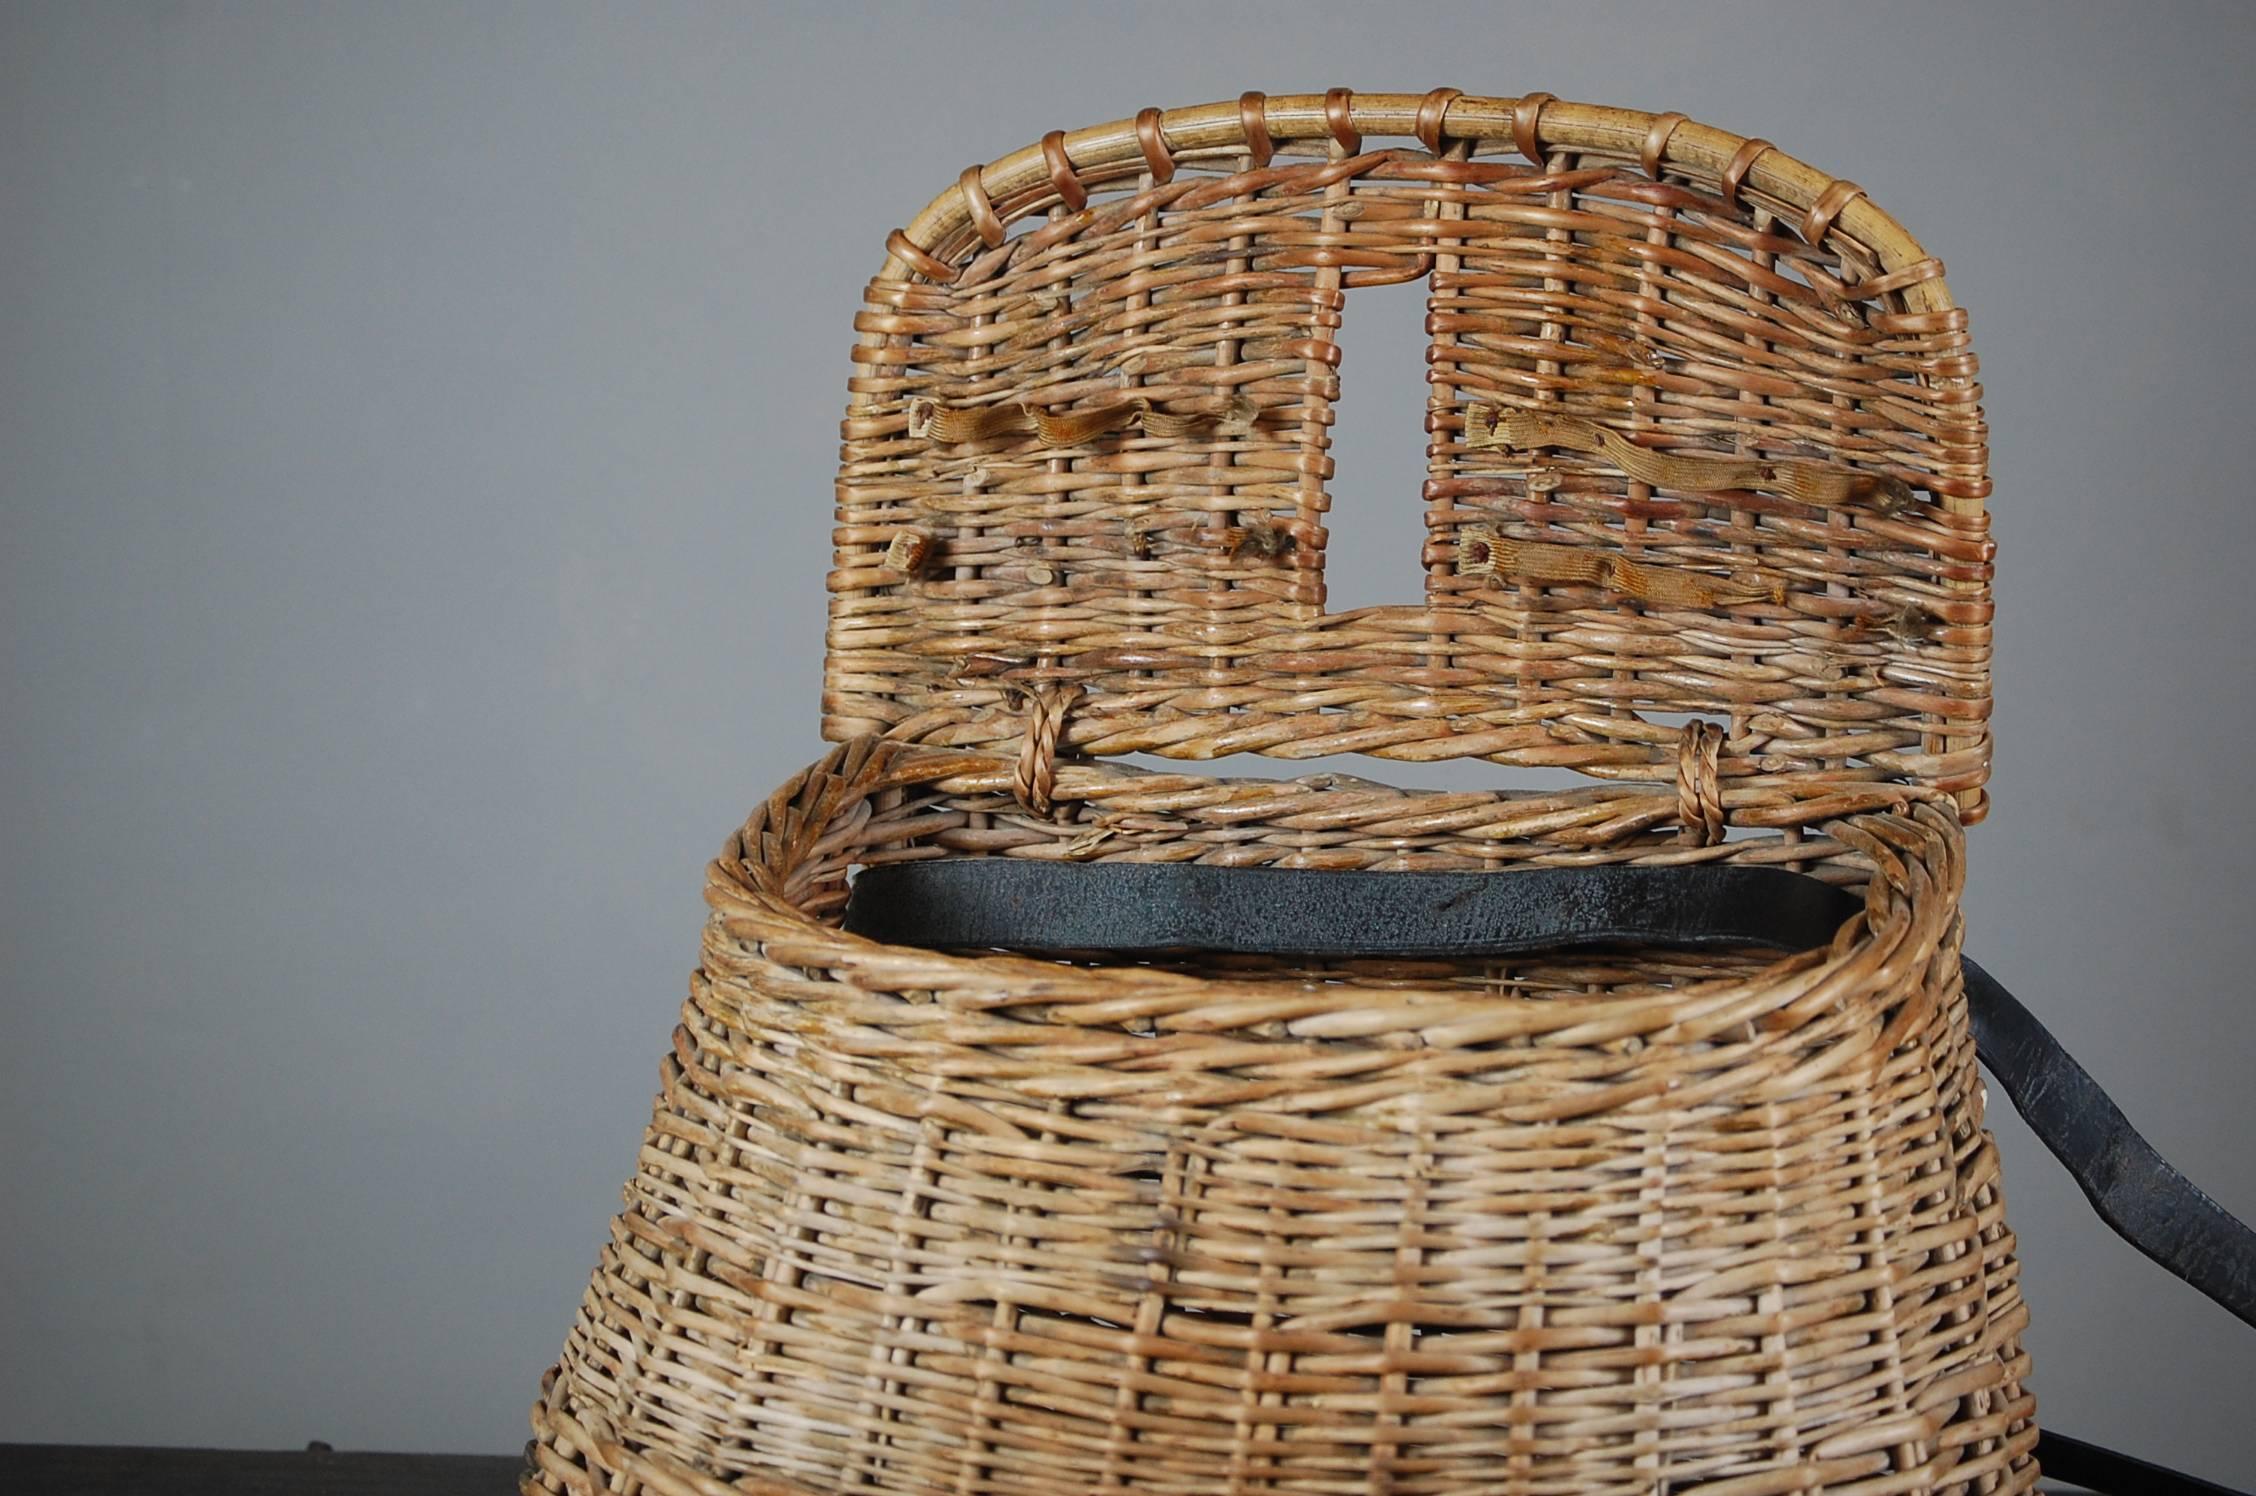 Early 20th century English wicker fishing creel, remarkable condition this does indeed show signs of use but is fully functional with leather over shoulder strap. English, circa 1925.